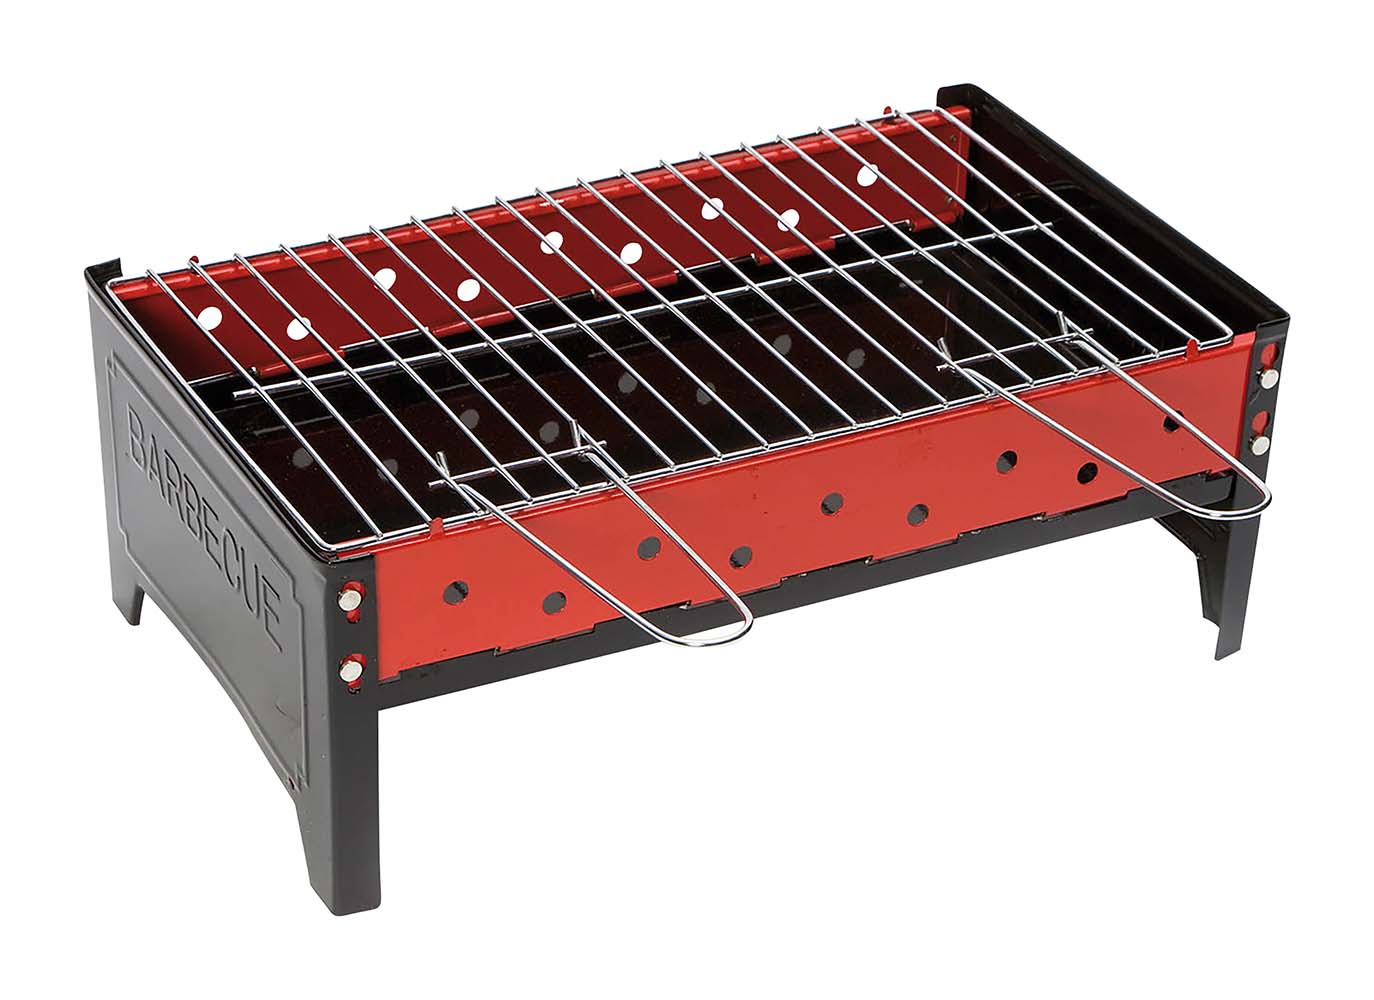 8108357 An extra flat foldable charcoal barbecue. Ideal to take with you on the road or at the campsite. Can be folded very flat and can be easily carried. On the side this barbecue is equipped with extra ventilation.